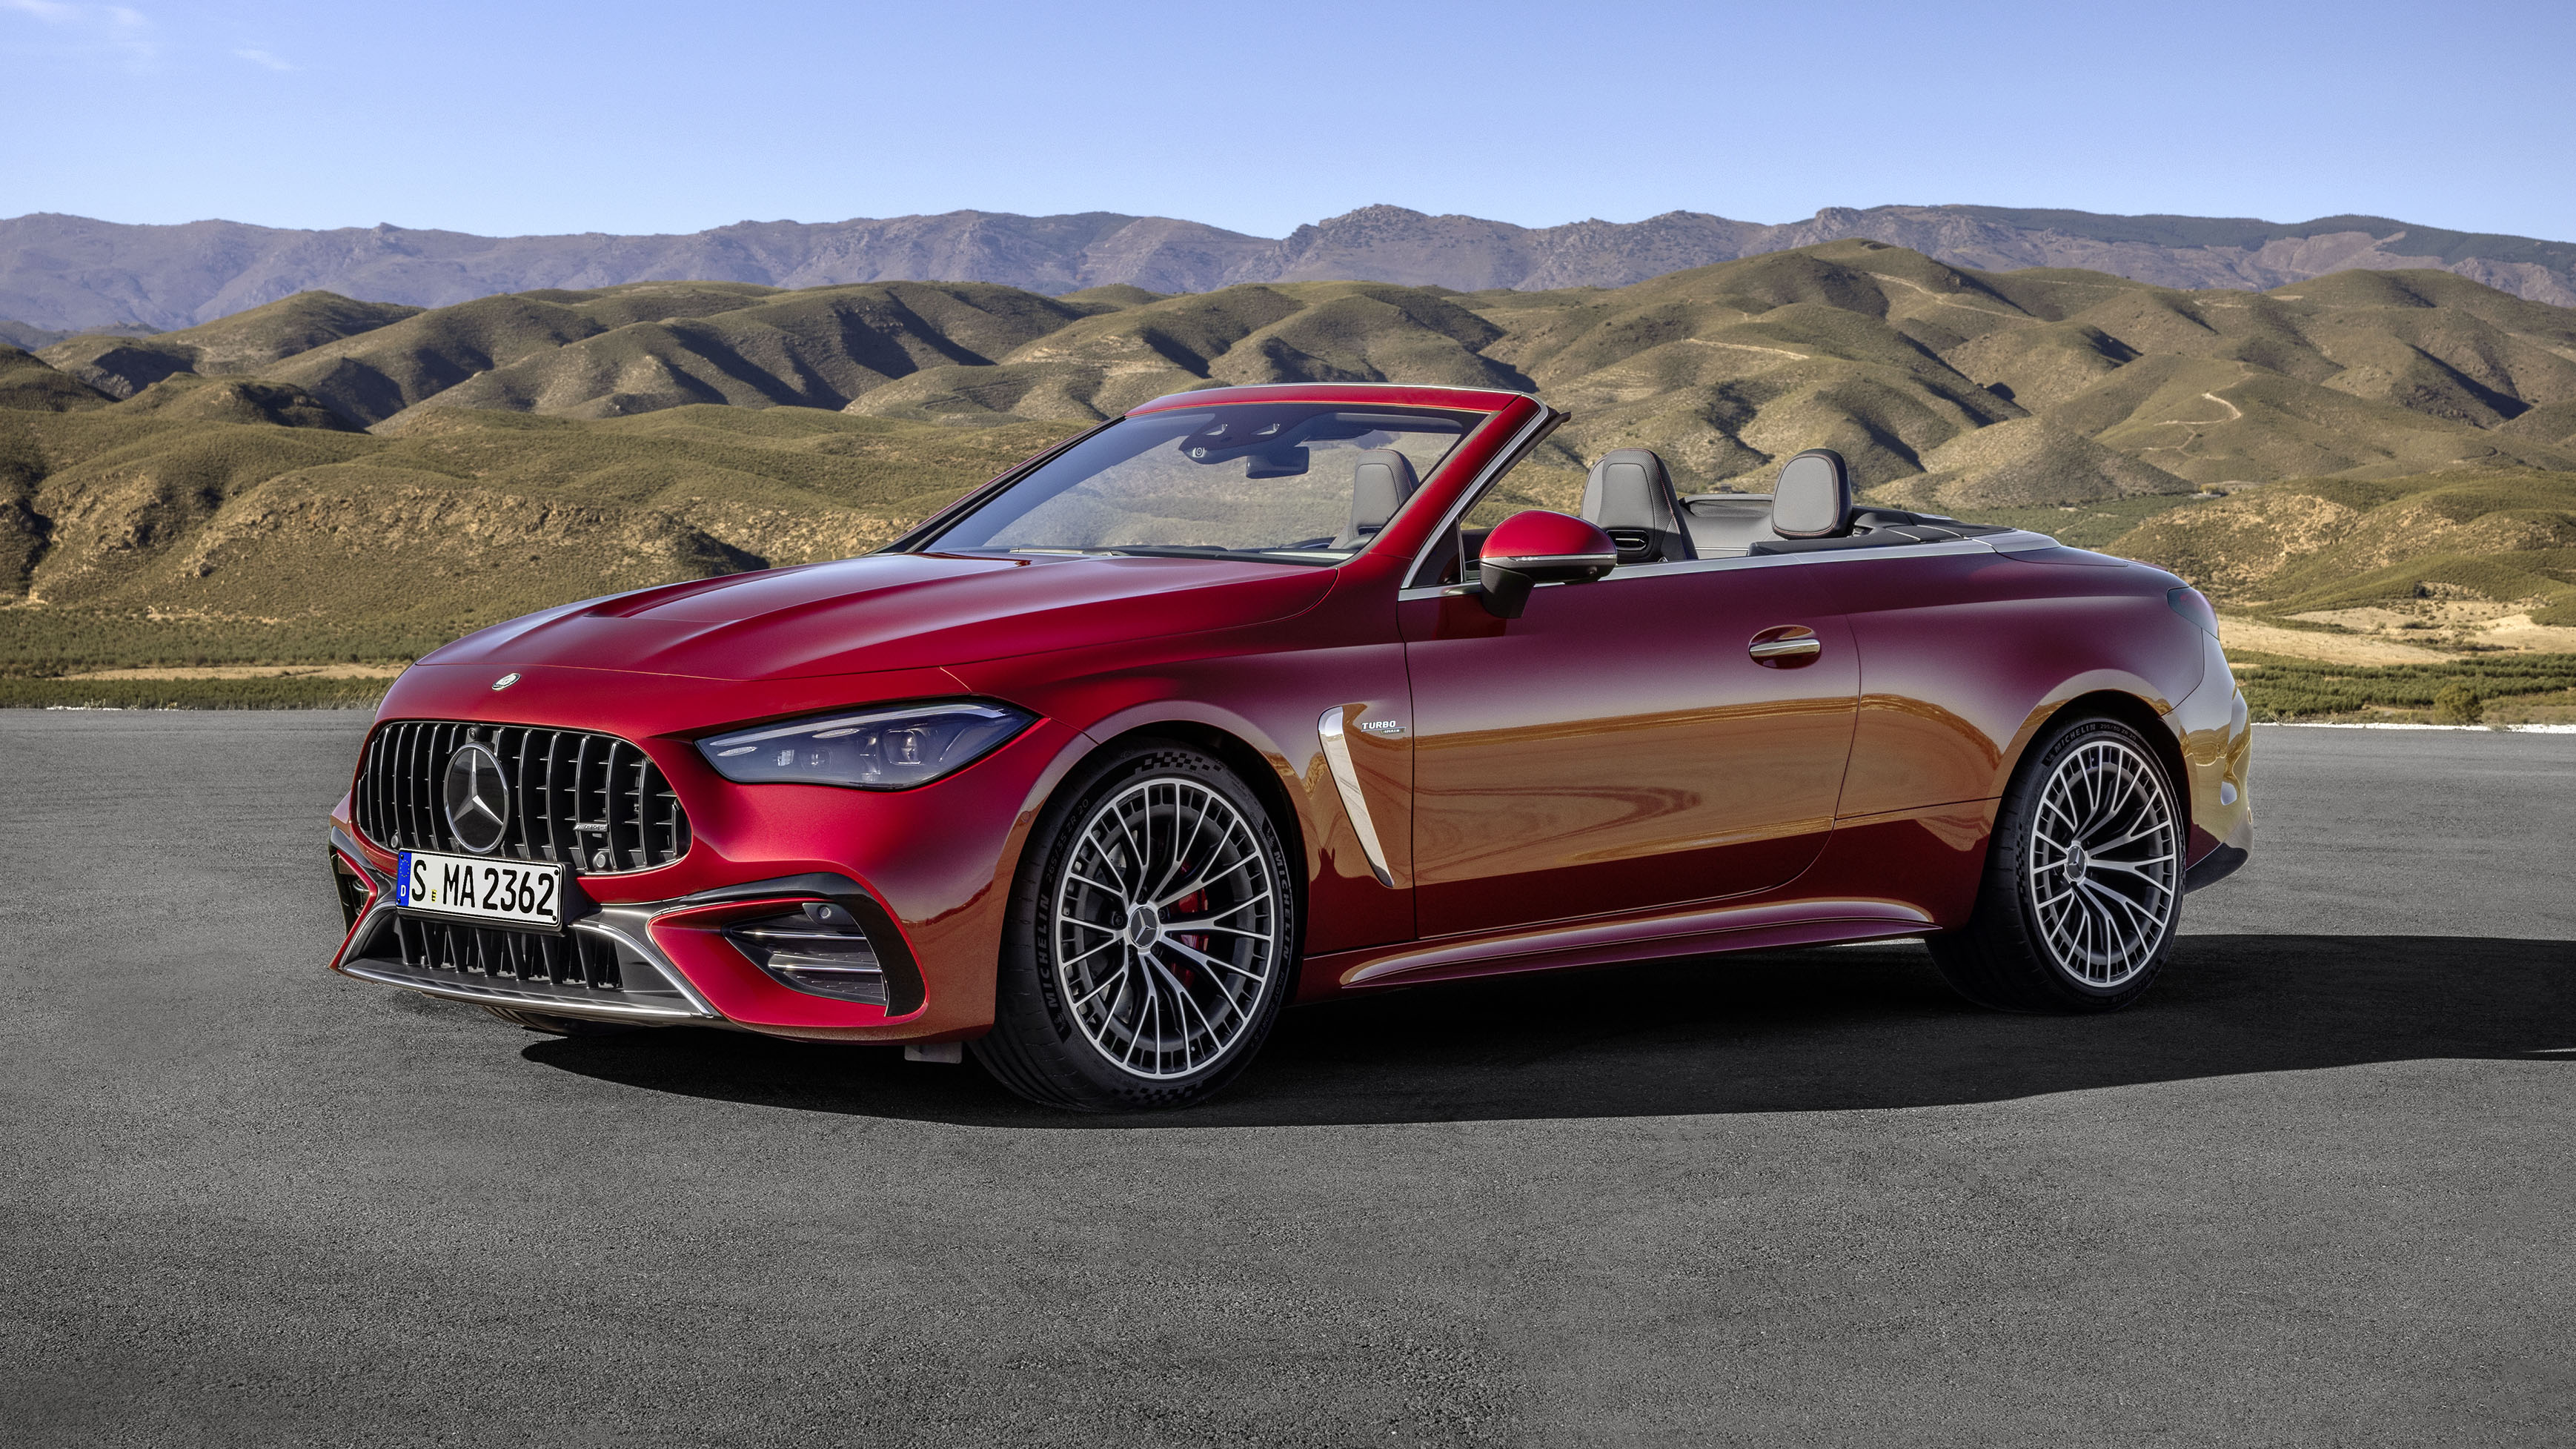 this is the new mercedes-amg cle 53 cabriolet, a 443bhp performance express